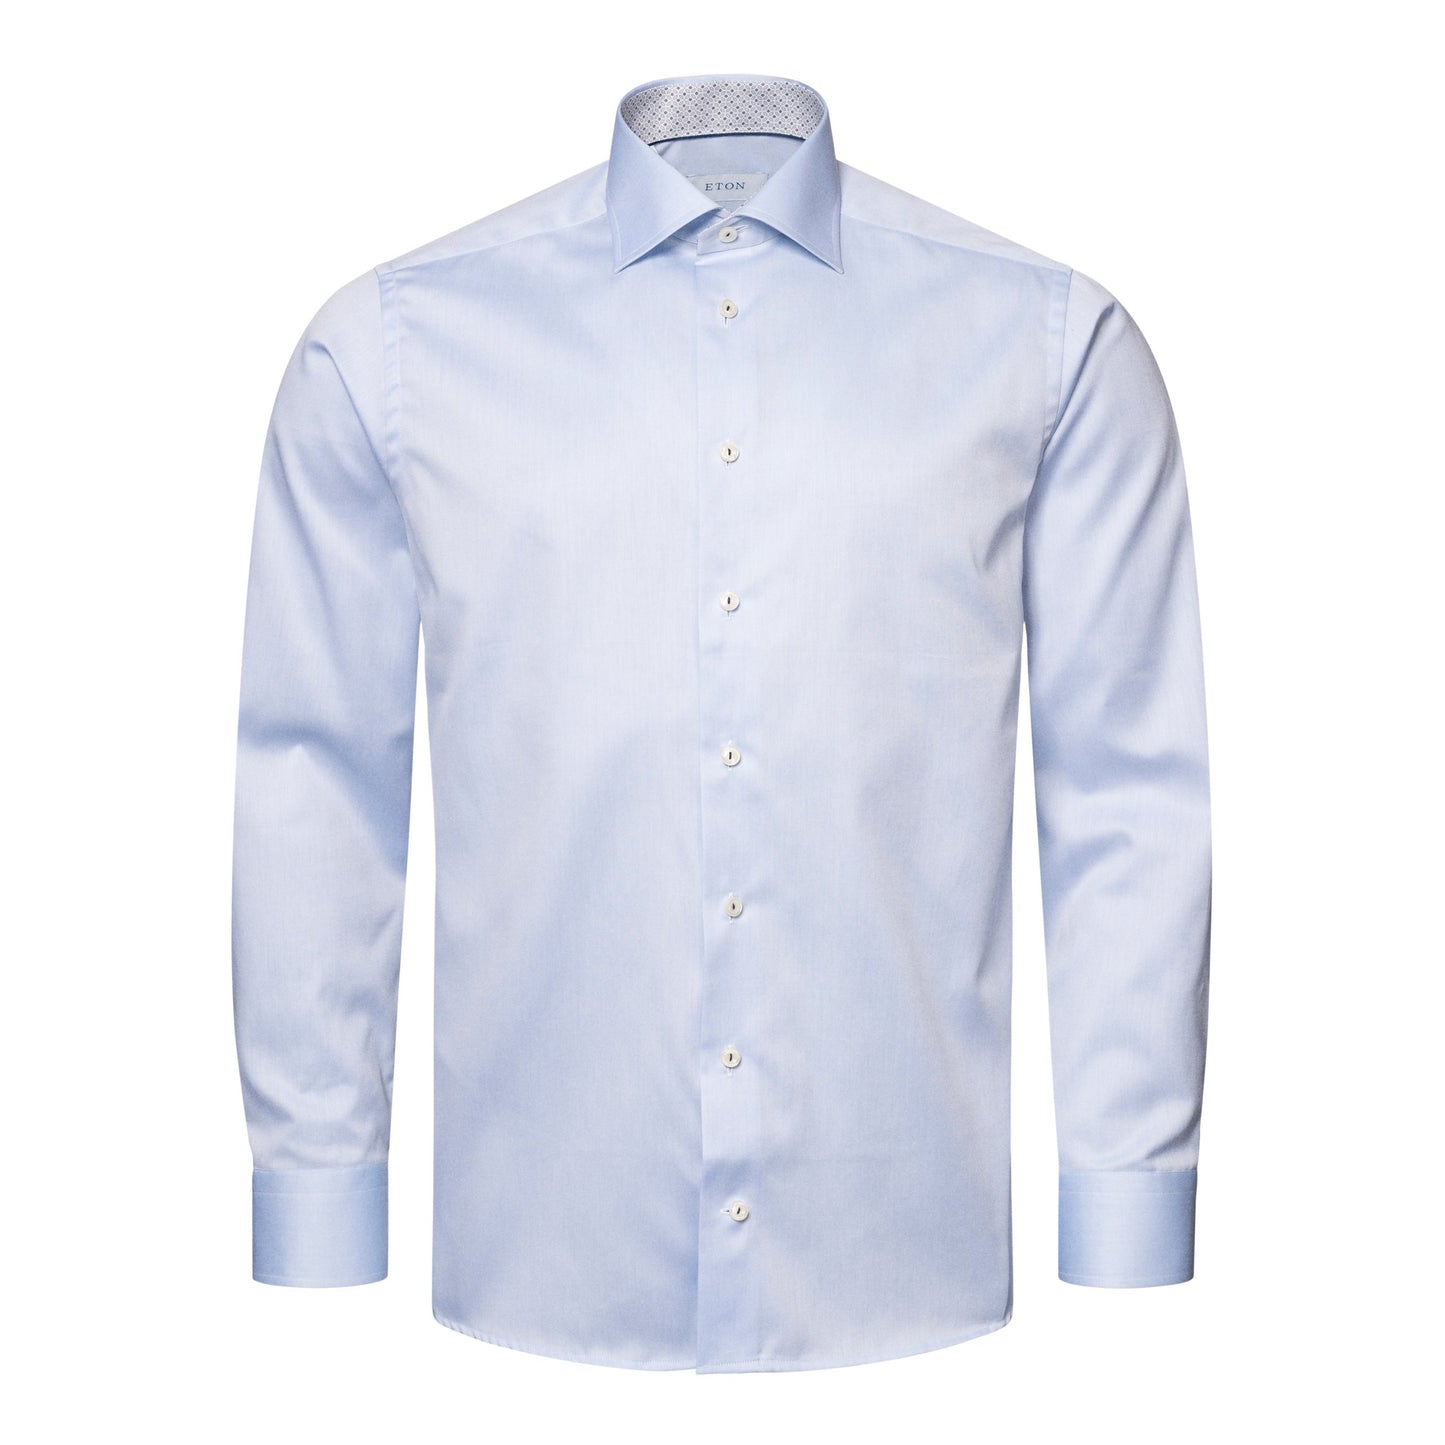 ETON Signature Twill Contemporary Fit Shirt in Light Blue with Floral Contrast Details 10001046021